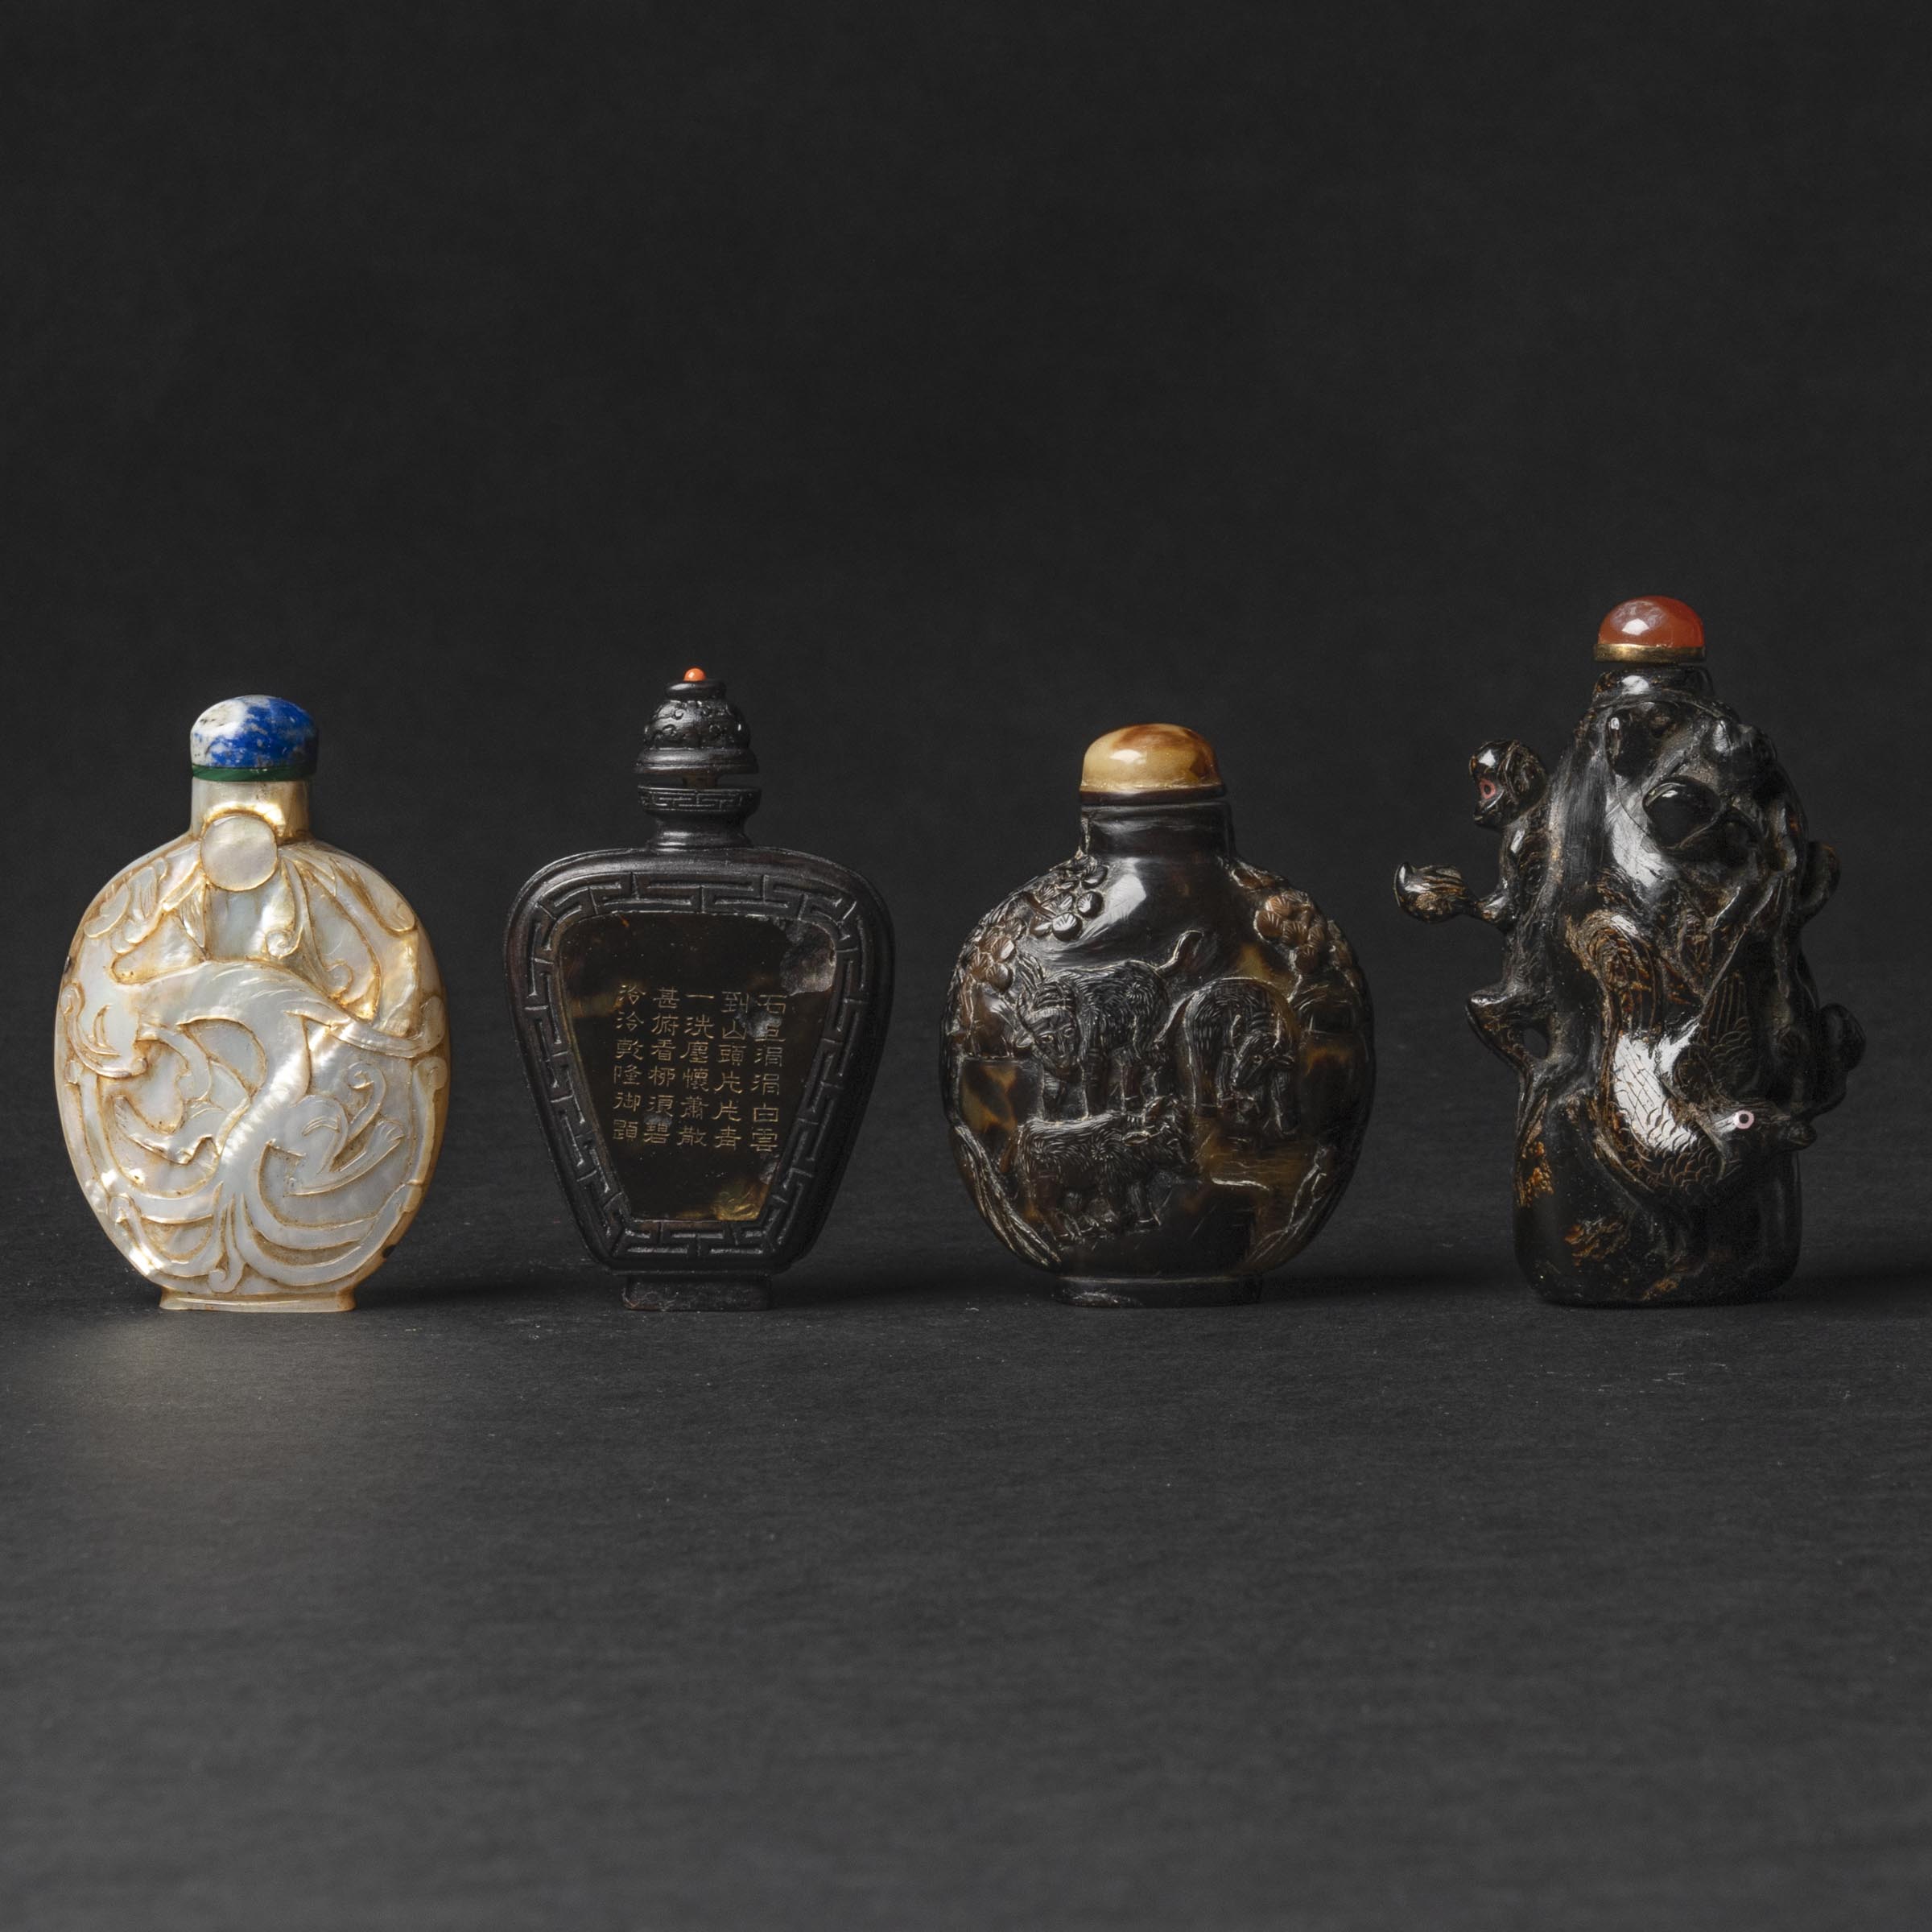 Two Tortoiseshell Snuff Bottles, Together With Two Black Coral and Mother-of-Pearl Snuff Bottles, 19th/20th Century